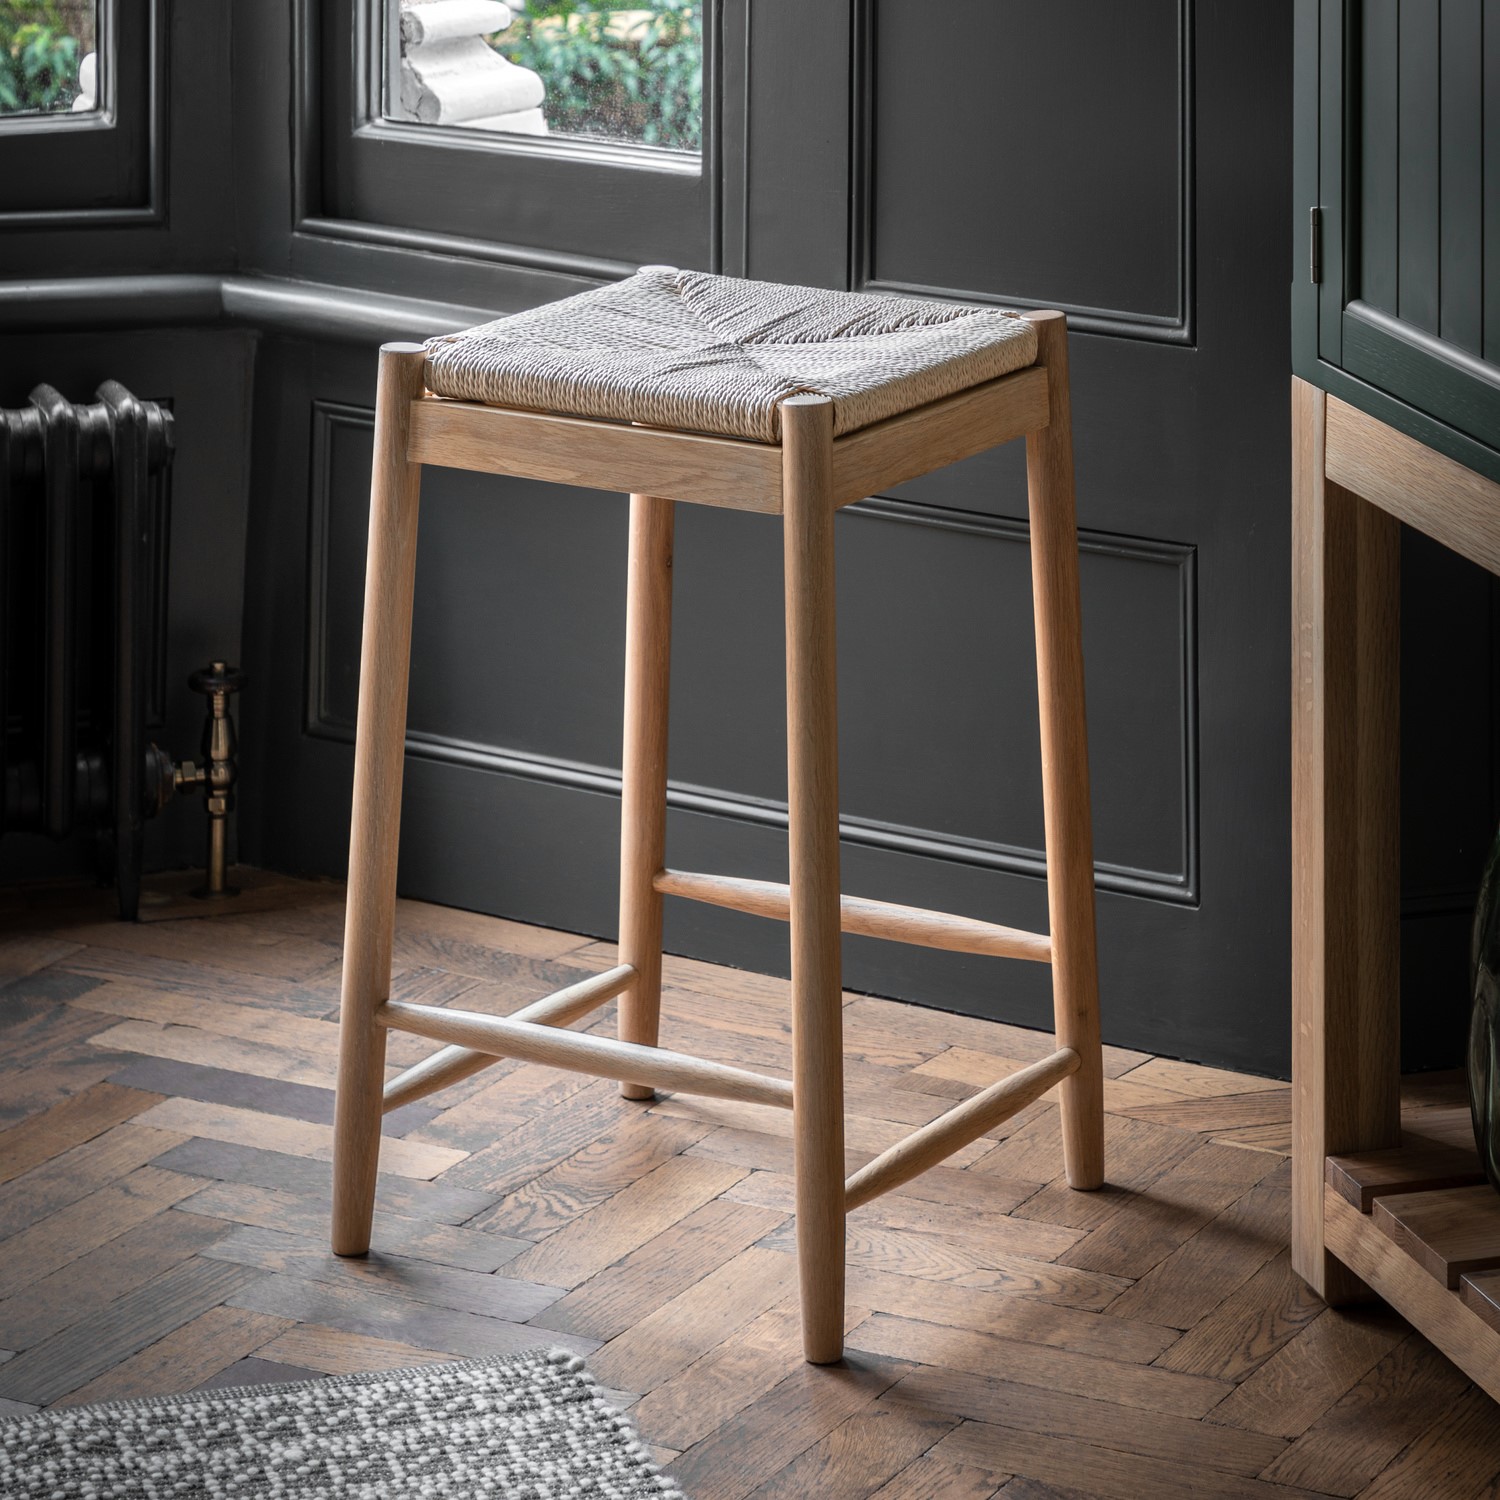 Read more about Eton rope stool natural caspian house